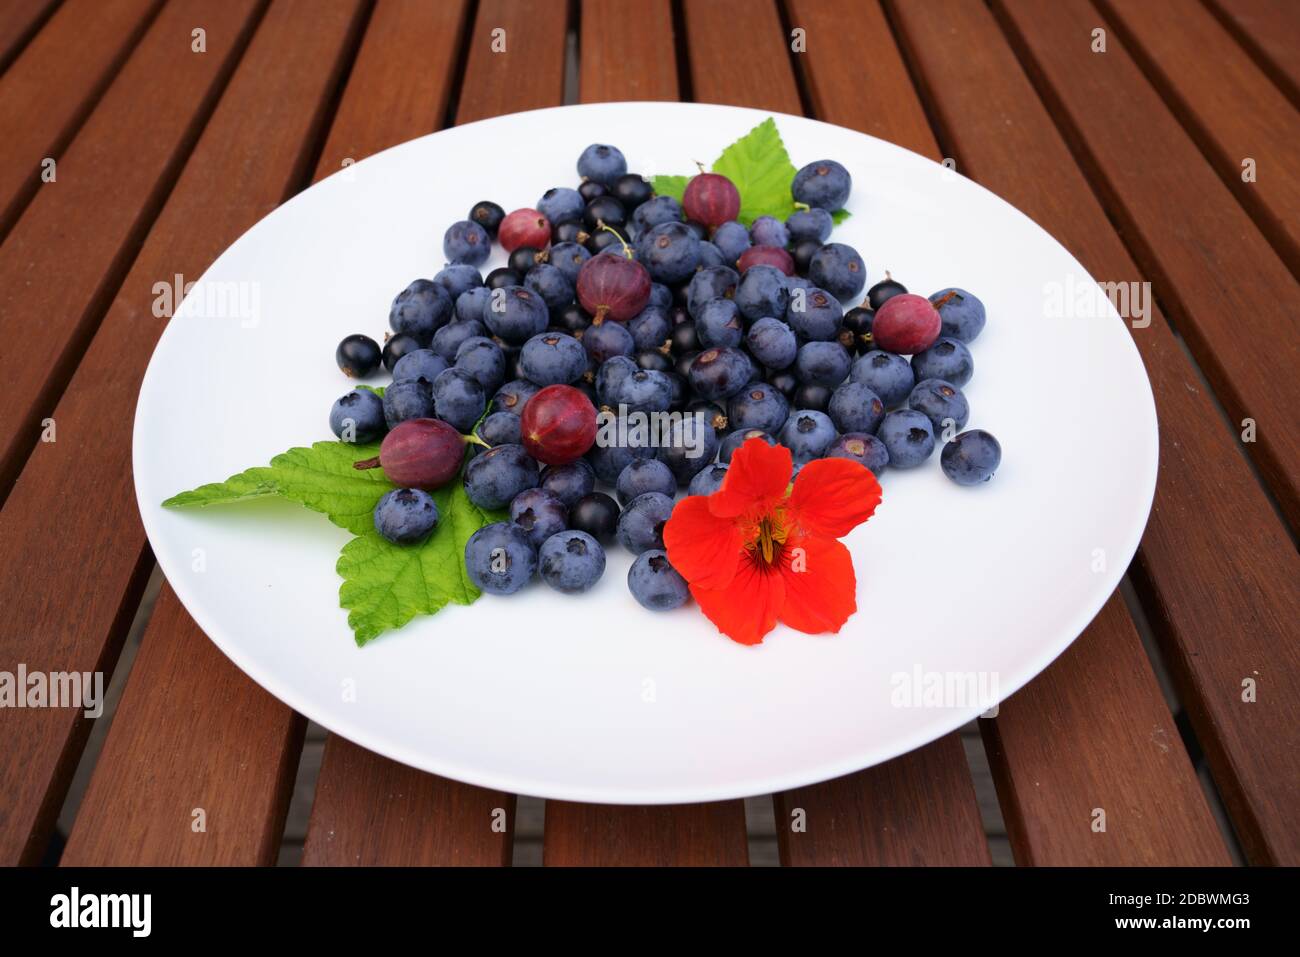 Plateful of fresh Finnish blueberries, gooseberries and black currant served on a white plate on a wooden table with green black currant leafs and red Stock Photo